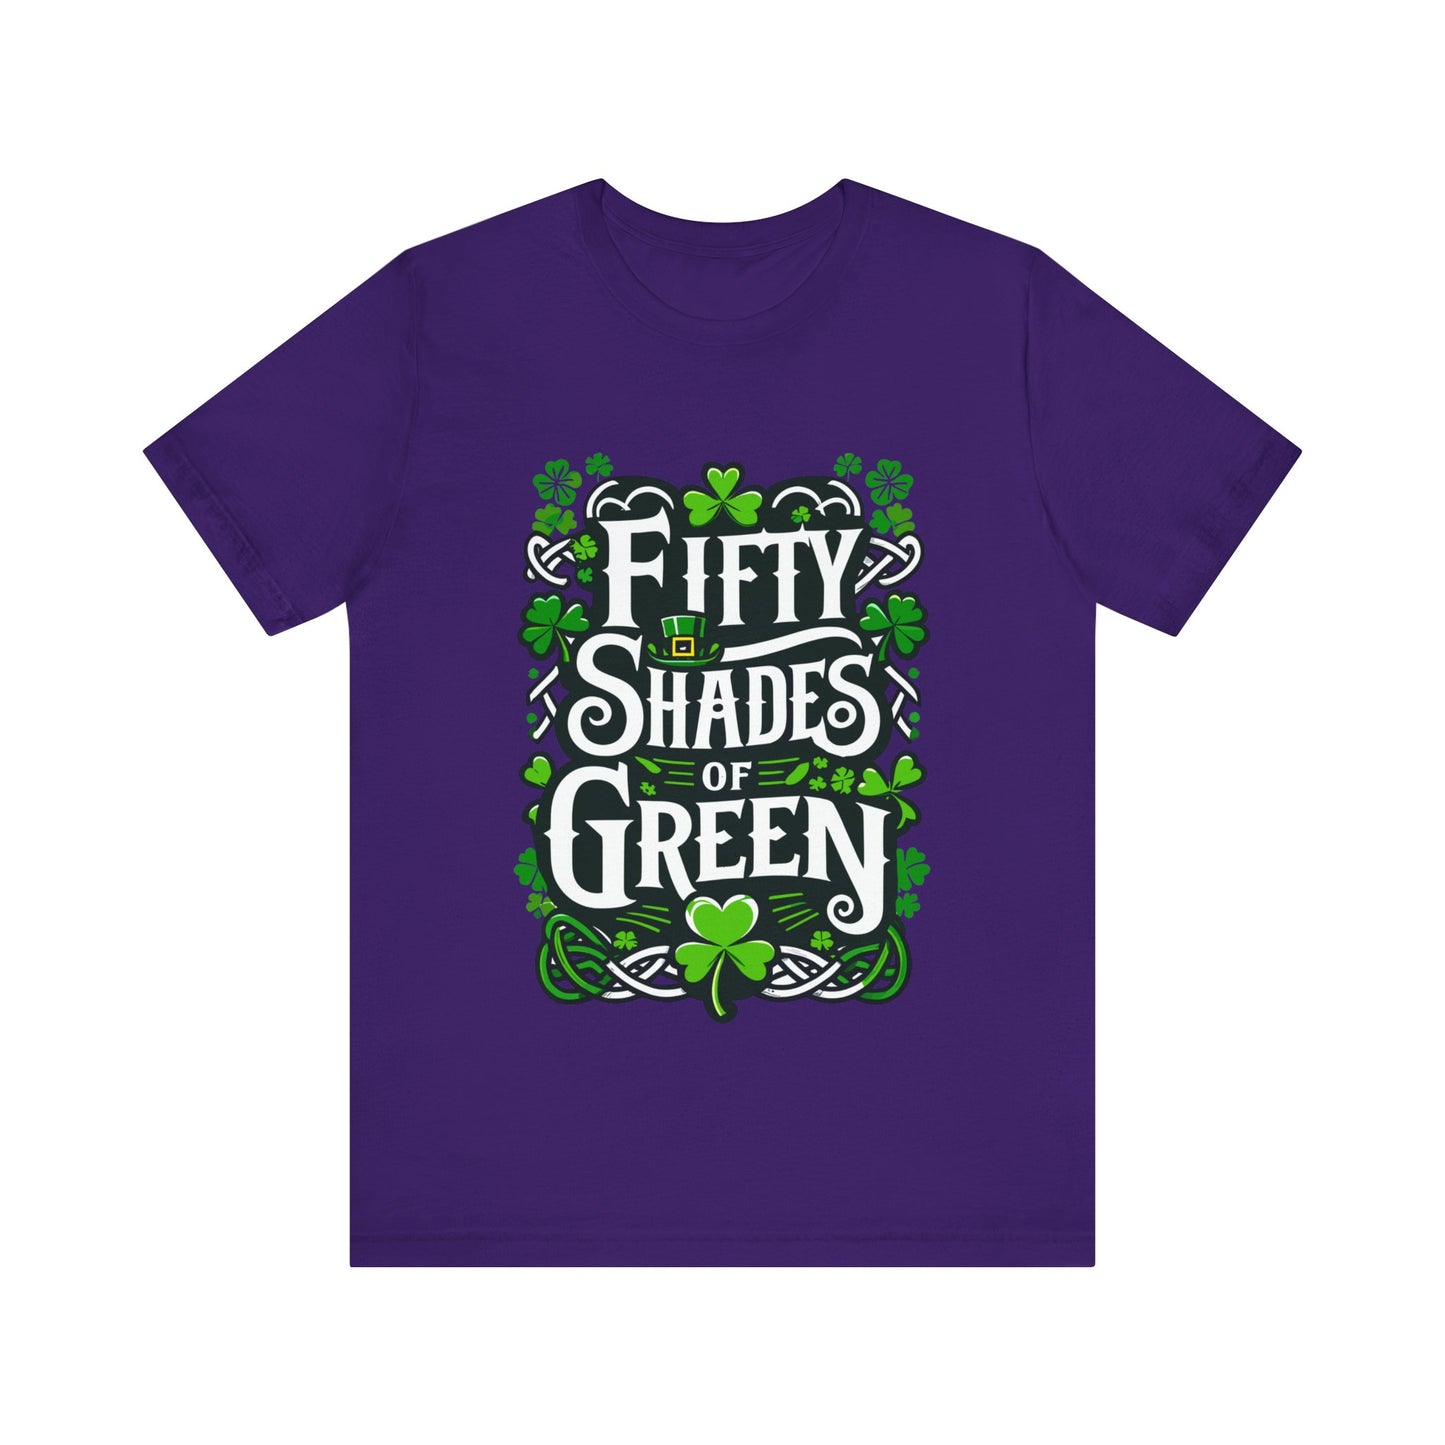 Fifty Shades Of Green - Unisex T-Shirt